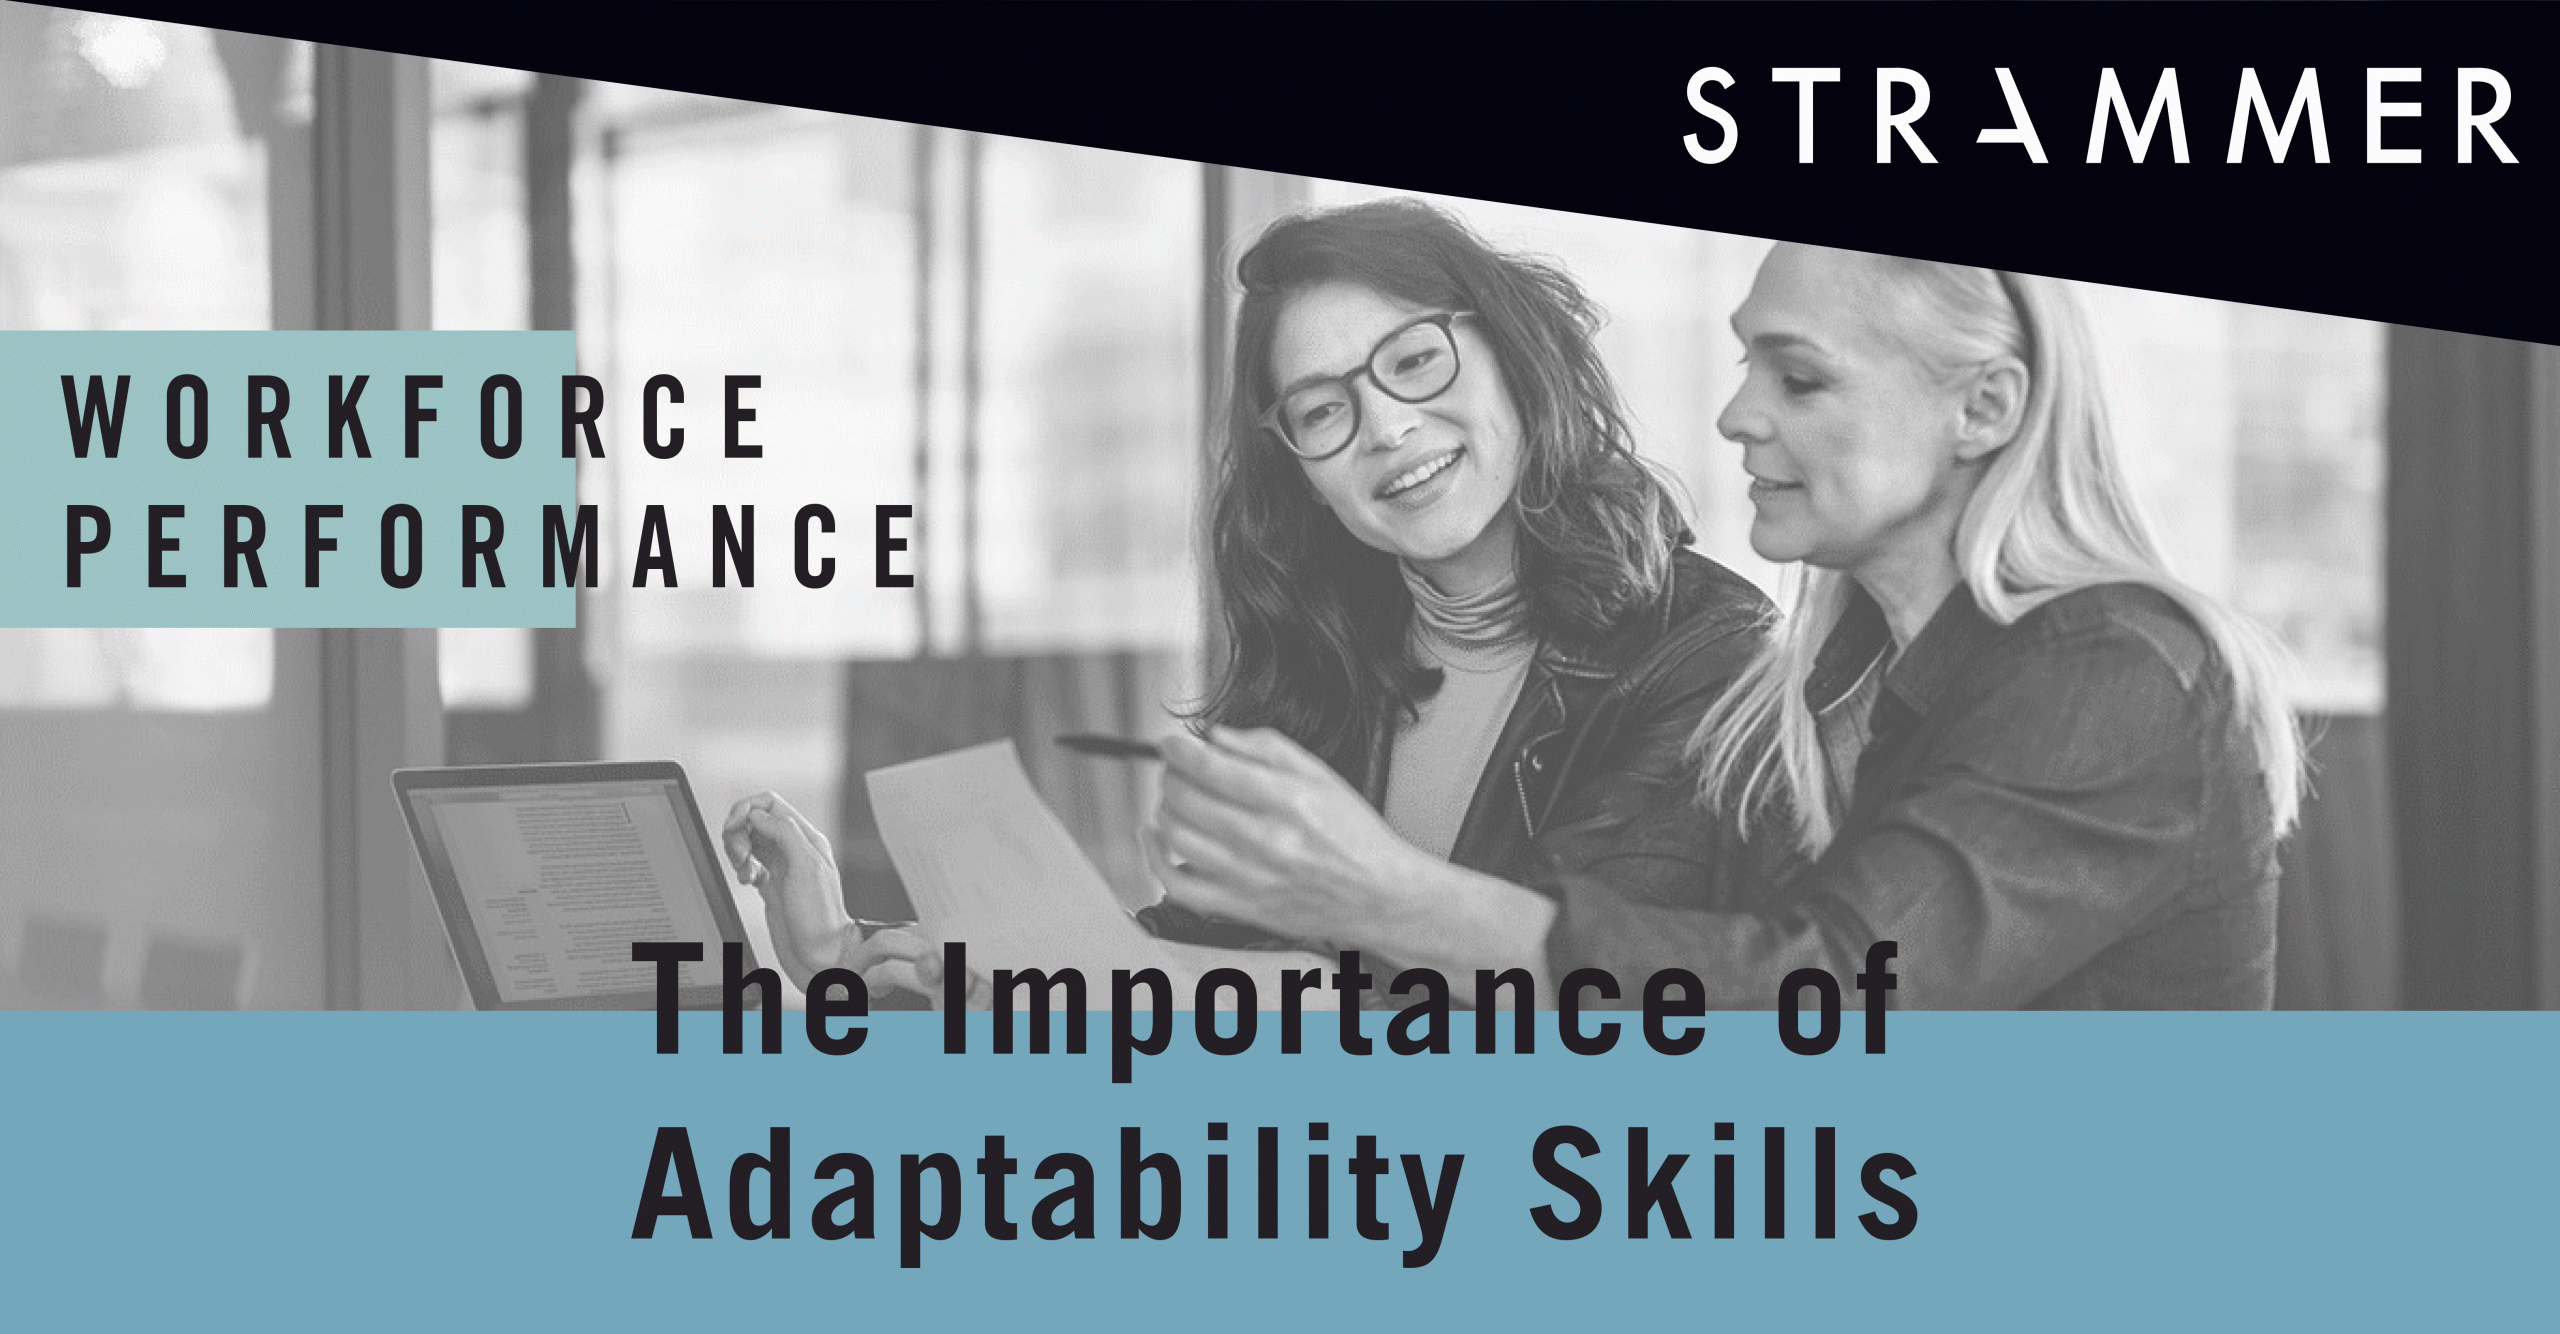 Adaptability Skills and Their Importance